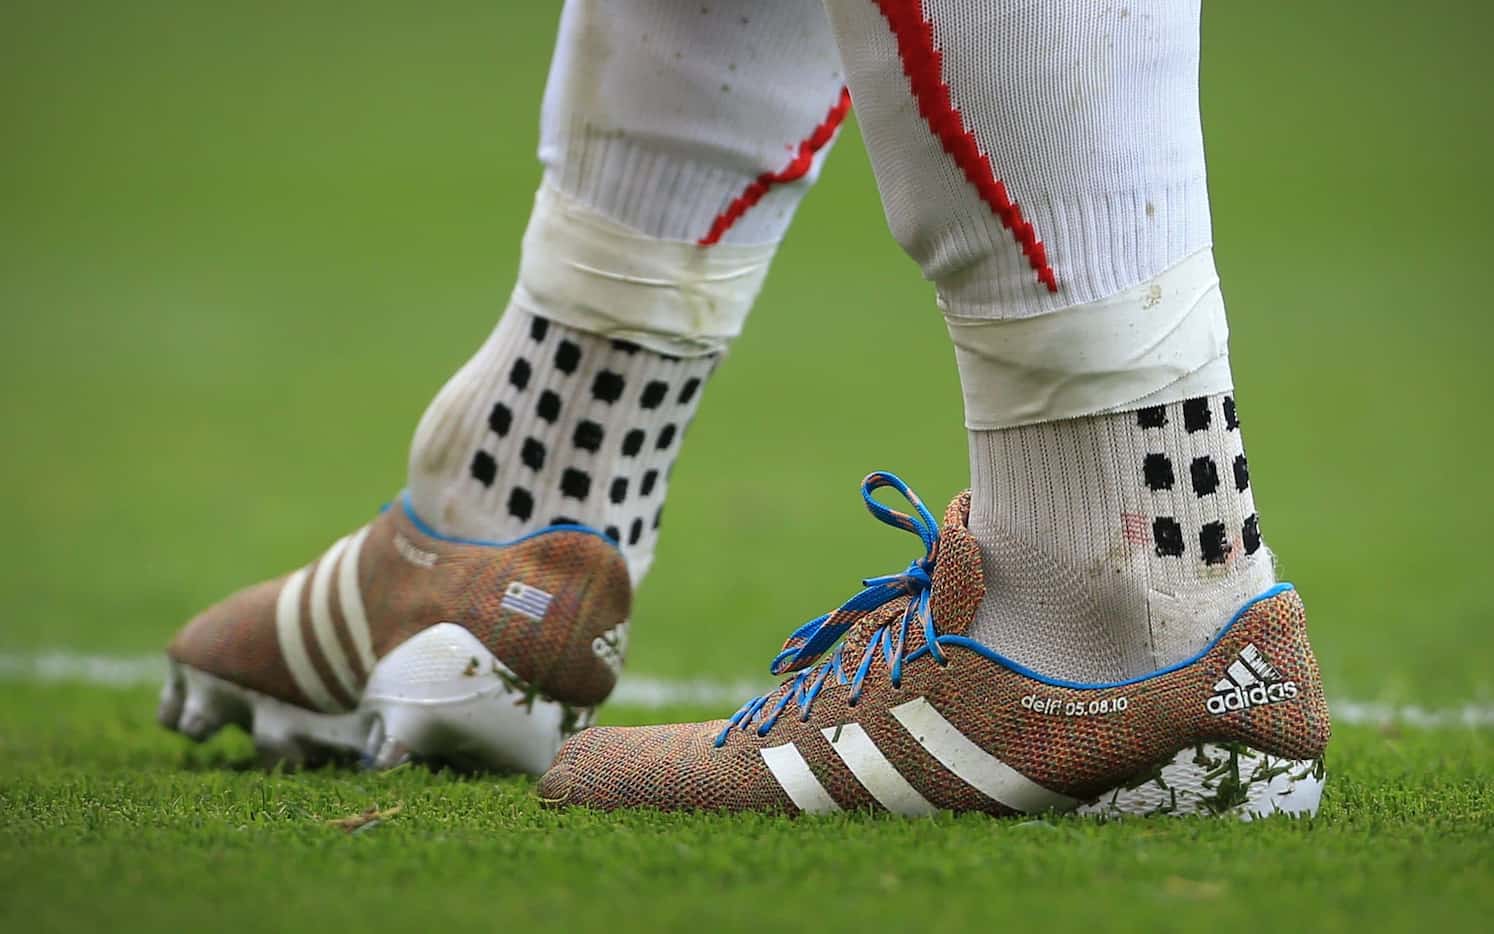 Luis Suarez wearing TRUsox while playing for Liverpool. The distinctive wet grip pattern is...